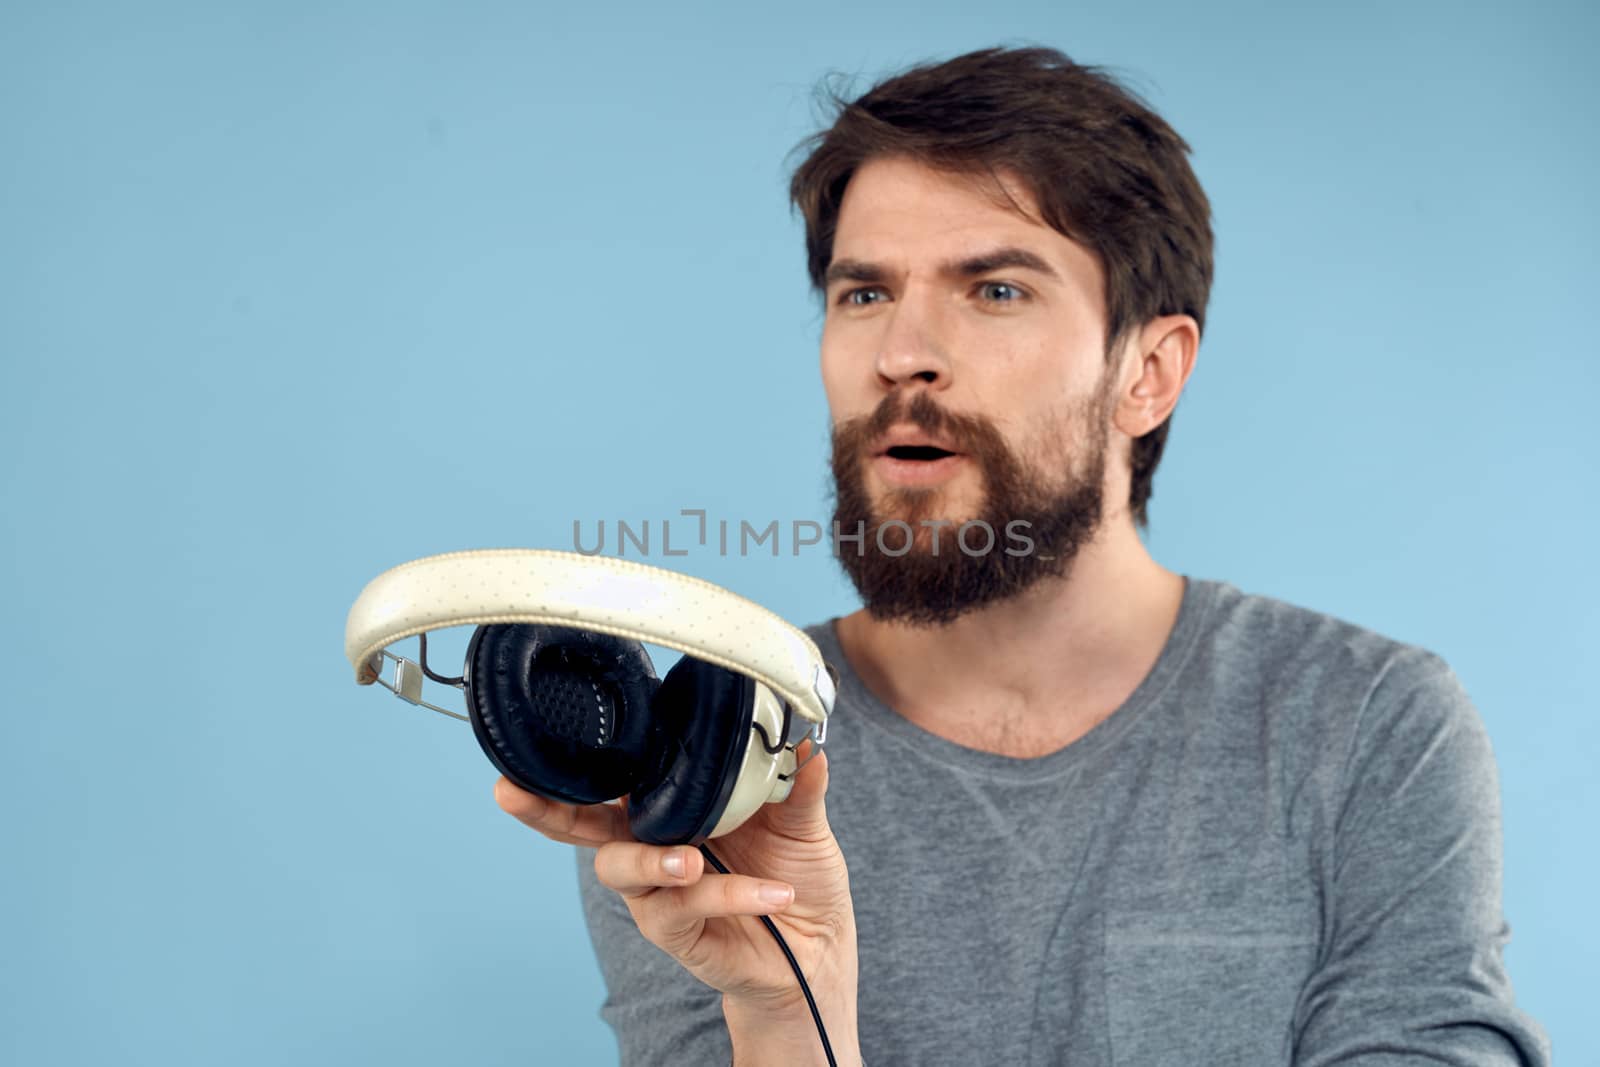 Man with headphones in hands music emotion technology lifestyle fun blue background close-up. High quality photo